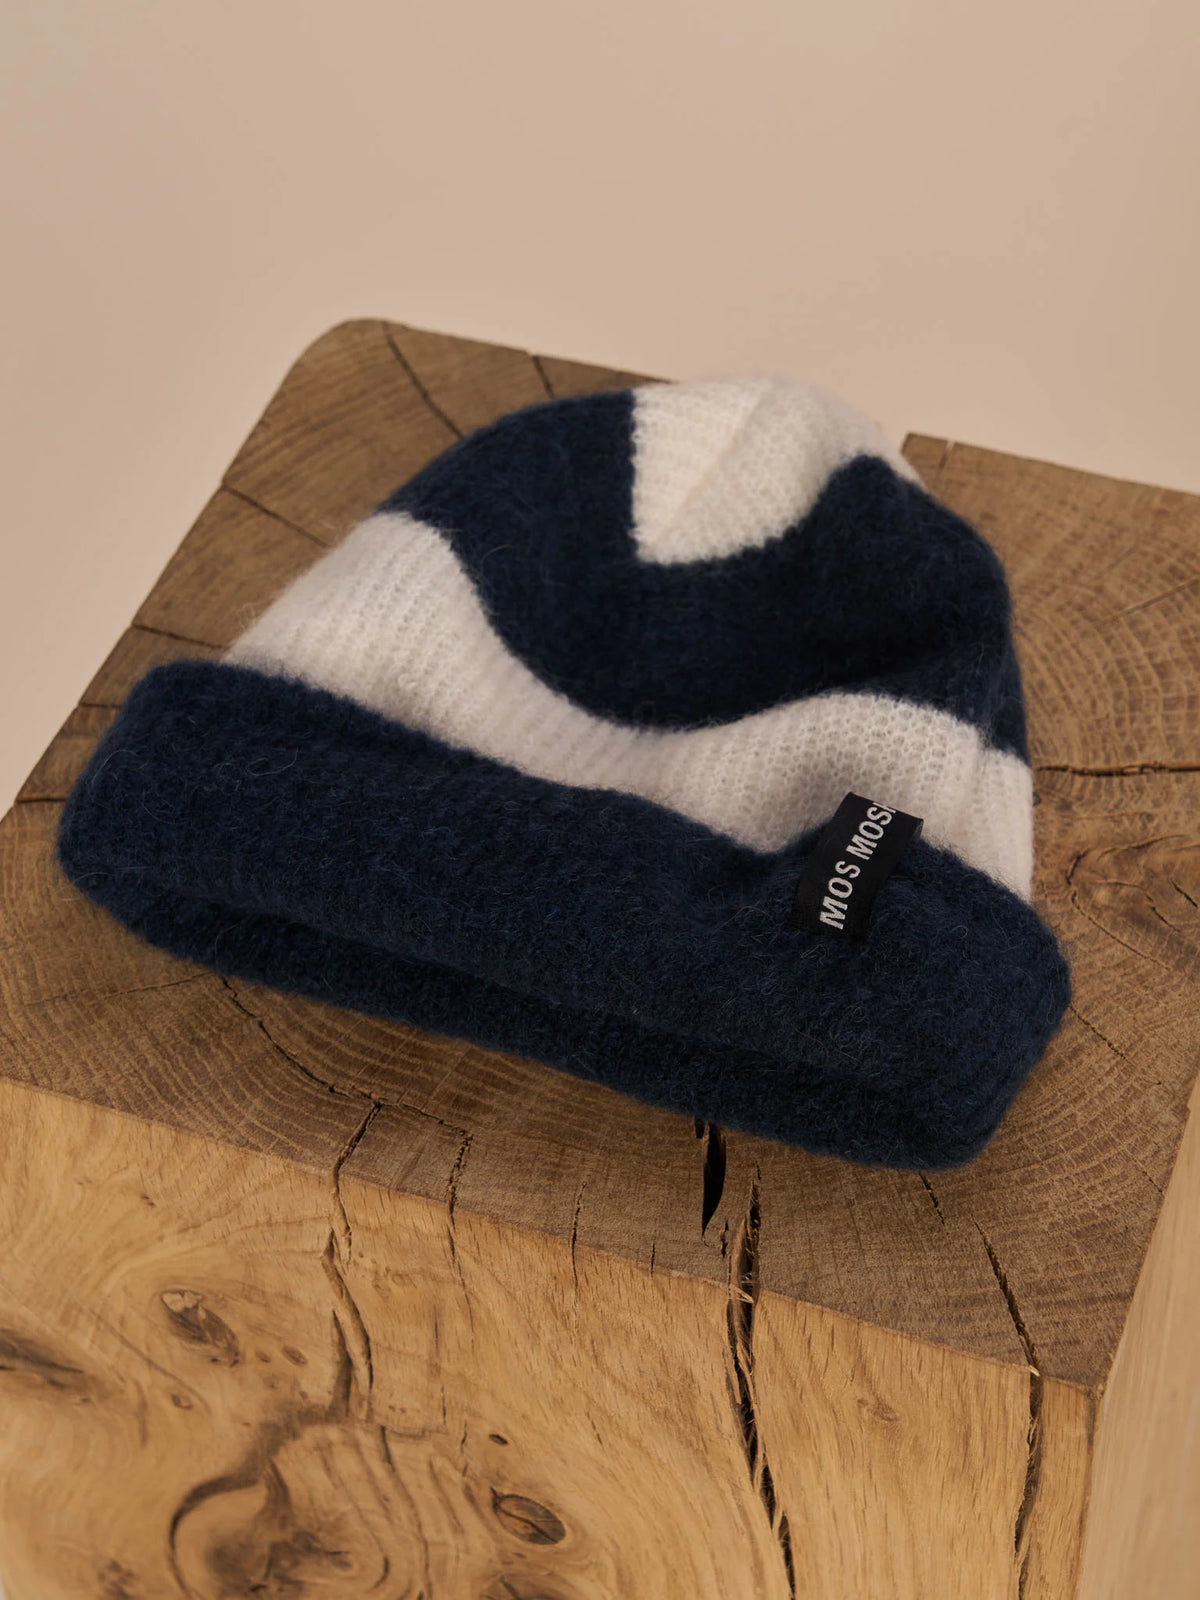 Navy and ecru striped woollen hat with turn up